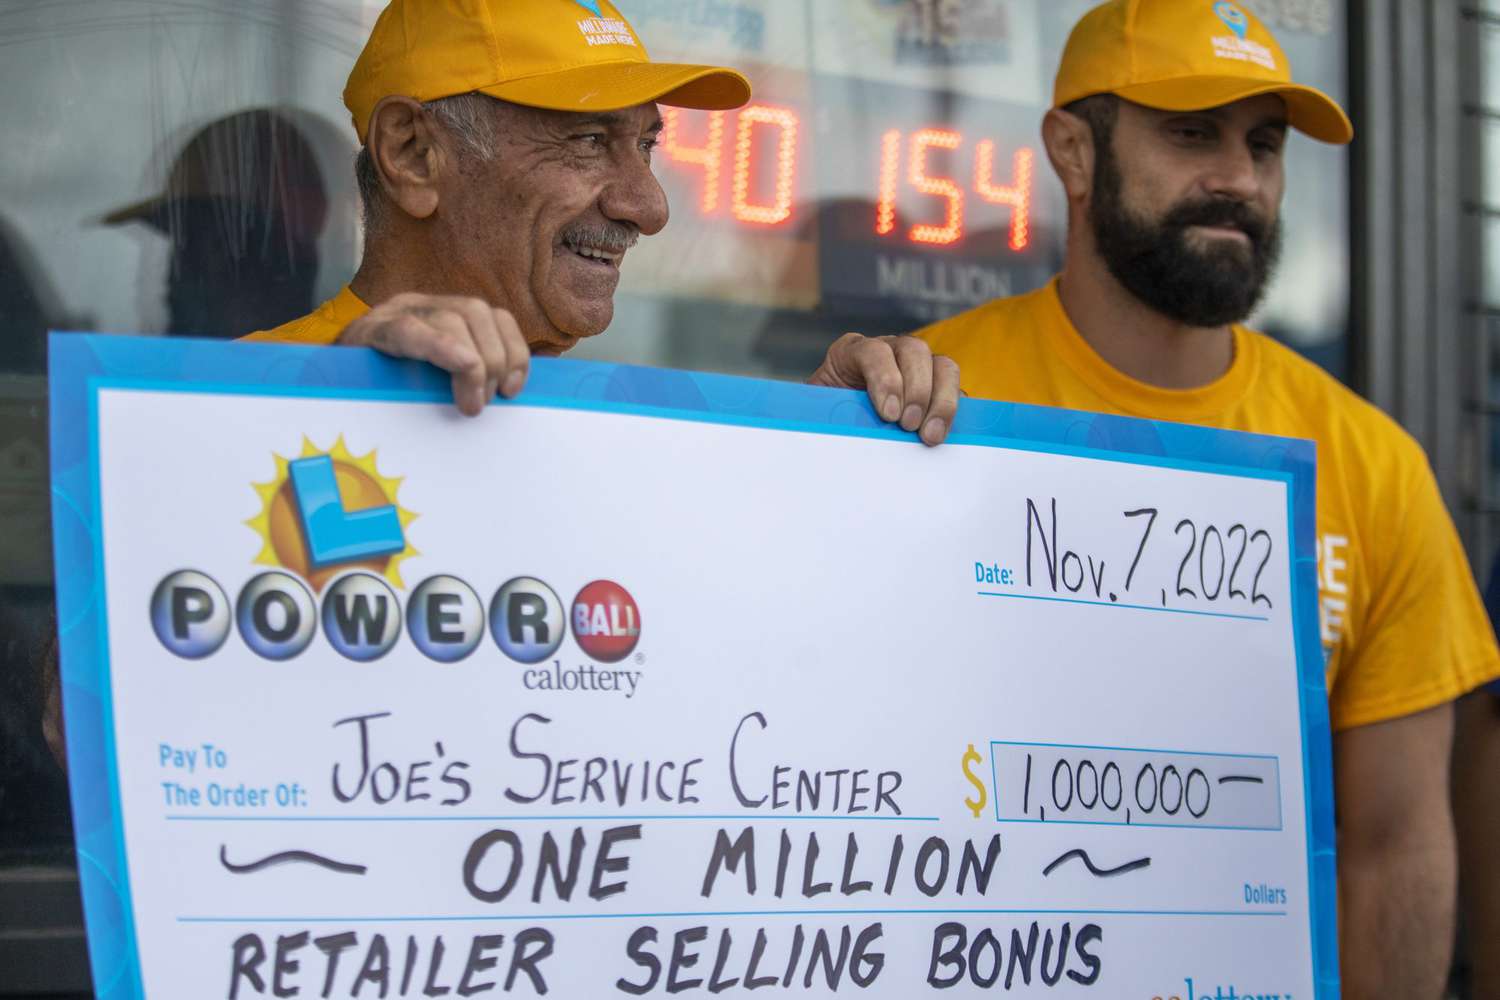 Powerball winner A single winning ticket for Monday night's delayed Powerball lottery drawing was sold in Altadena, with the jackpot worth a record-setting $2.04 billion, lottery officials confirmed today. California Lottery officials said the winning ticket was sold at J